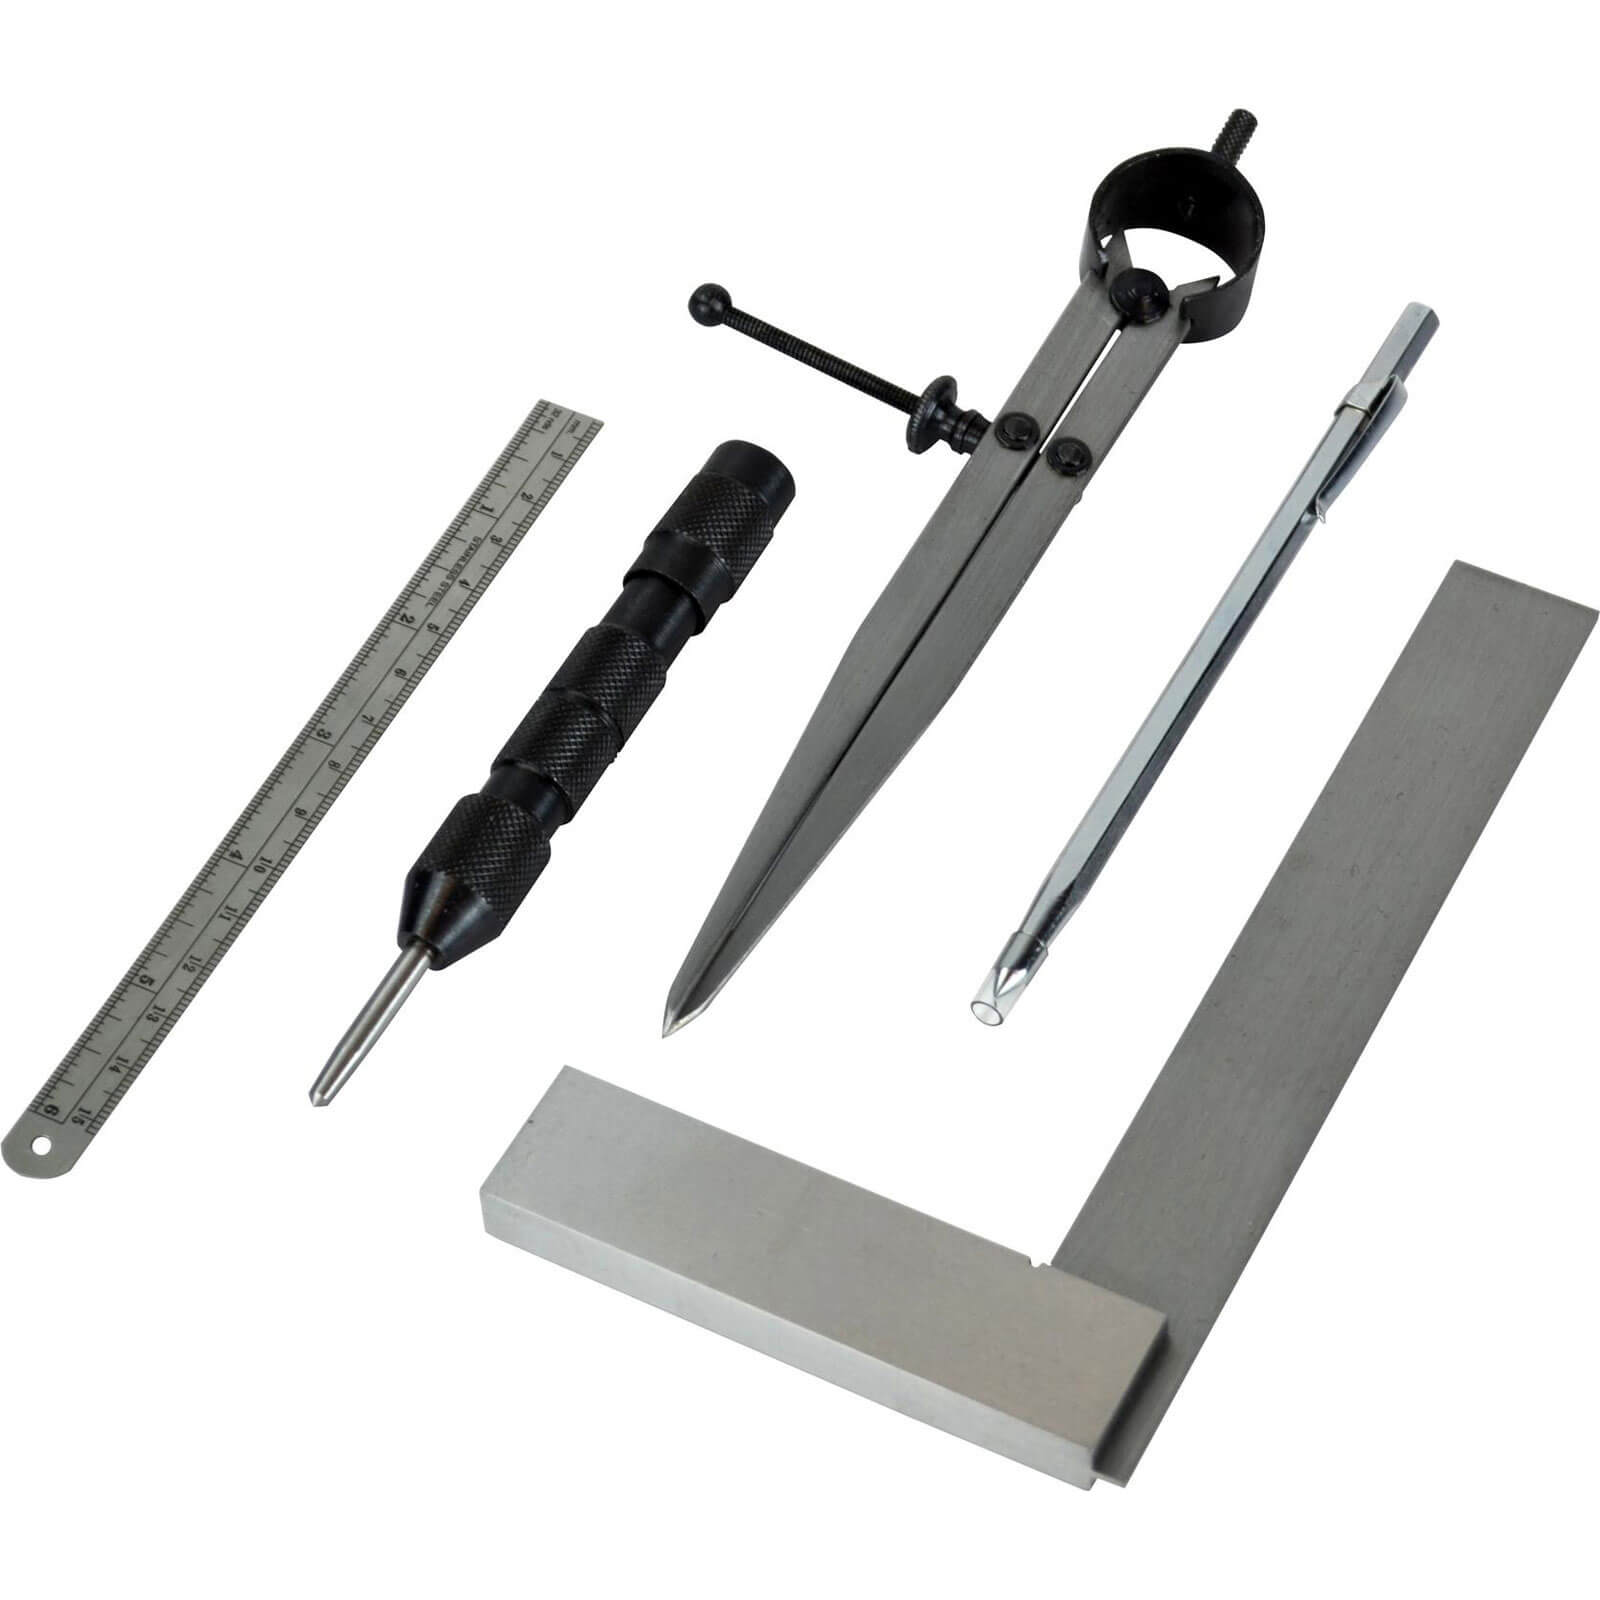 Image of Faithfull 5 Piece Stainless Steel Marking and Measuring Set